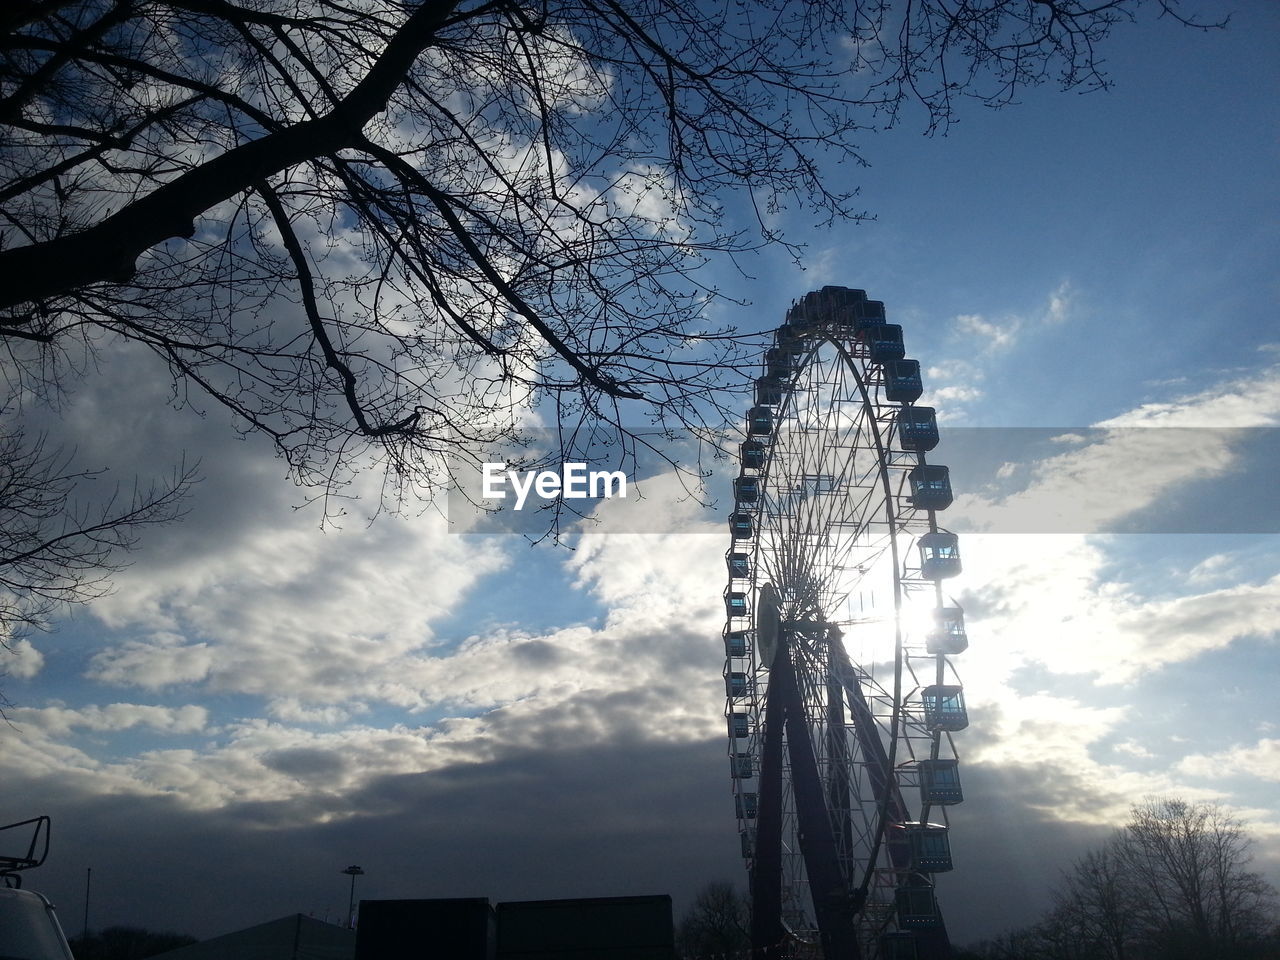 Low angle view of ferris wheel against clouds